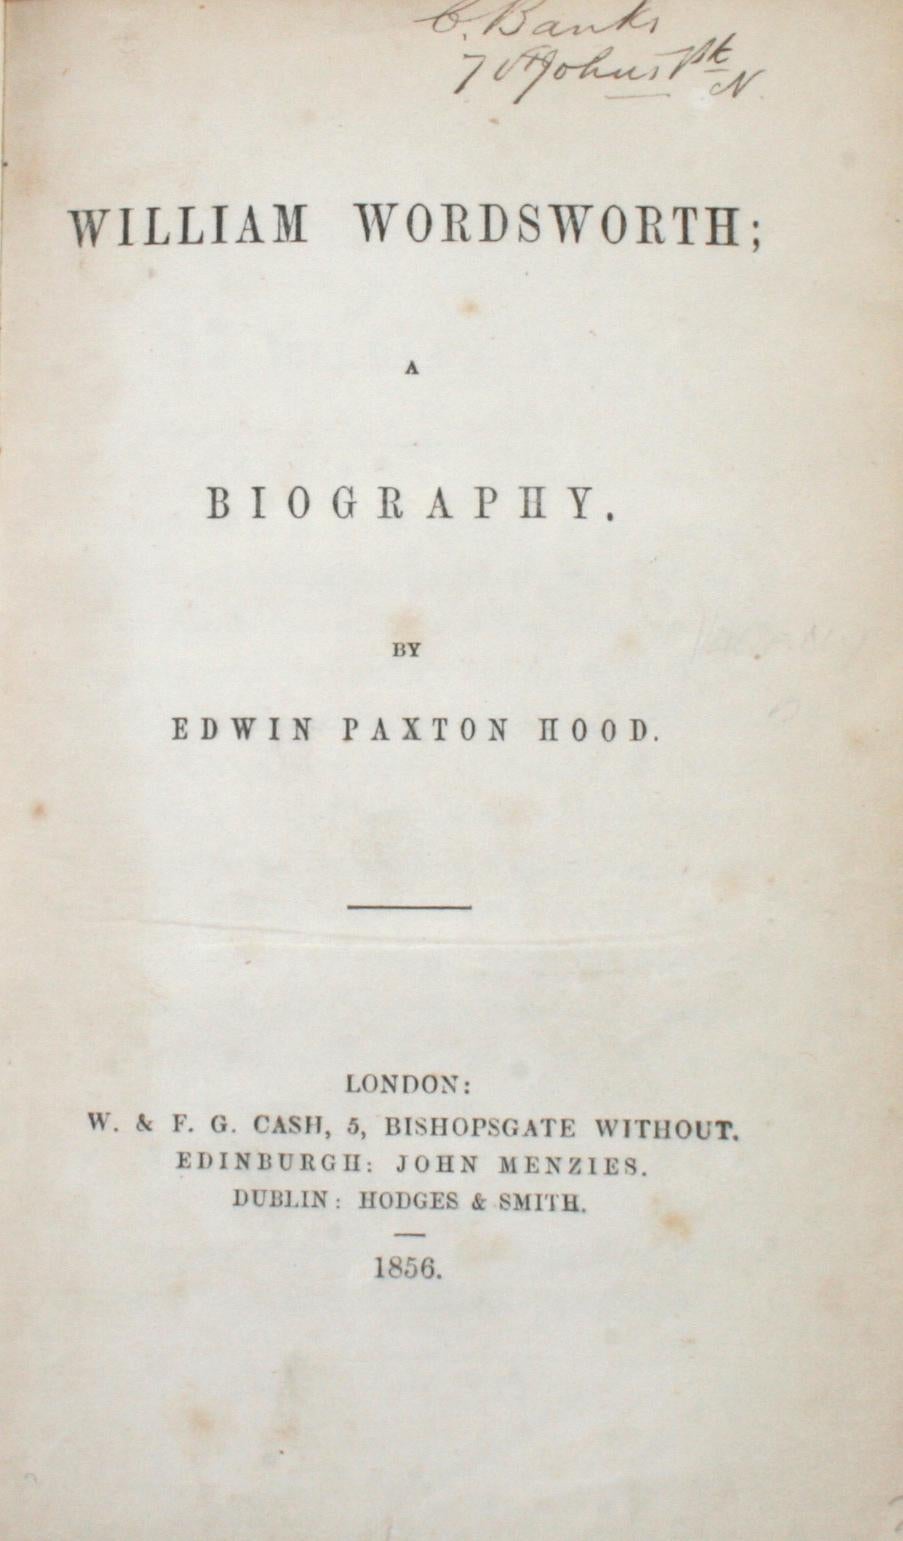 William Wordsworth a Biography by Edwin Paxton Hood, 1856. London: W. & F. G. Cash, 1856. Red Calf leather and cloth bound gilt hardcover with gilt top edge. 508 pp. A biography of William Wordsworth, (1770-1850), he was a major English Romantic